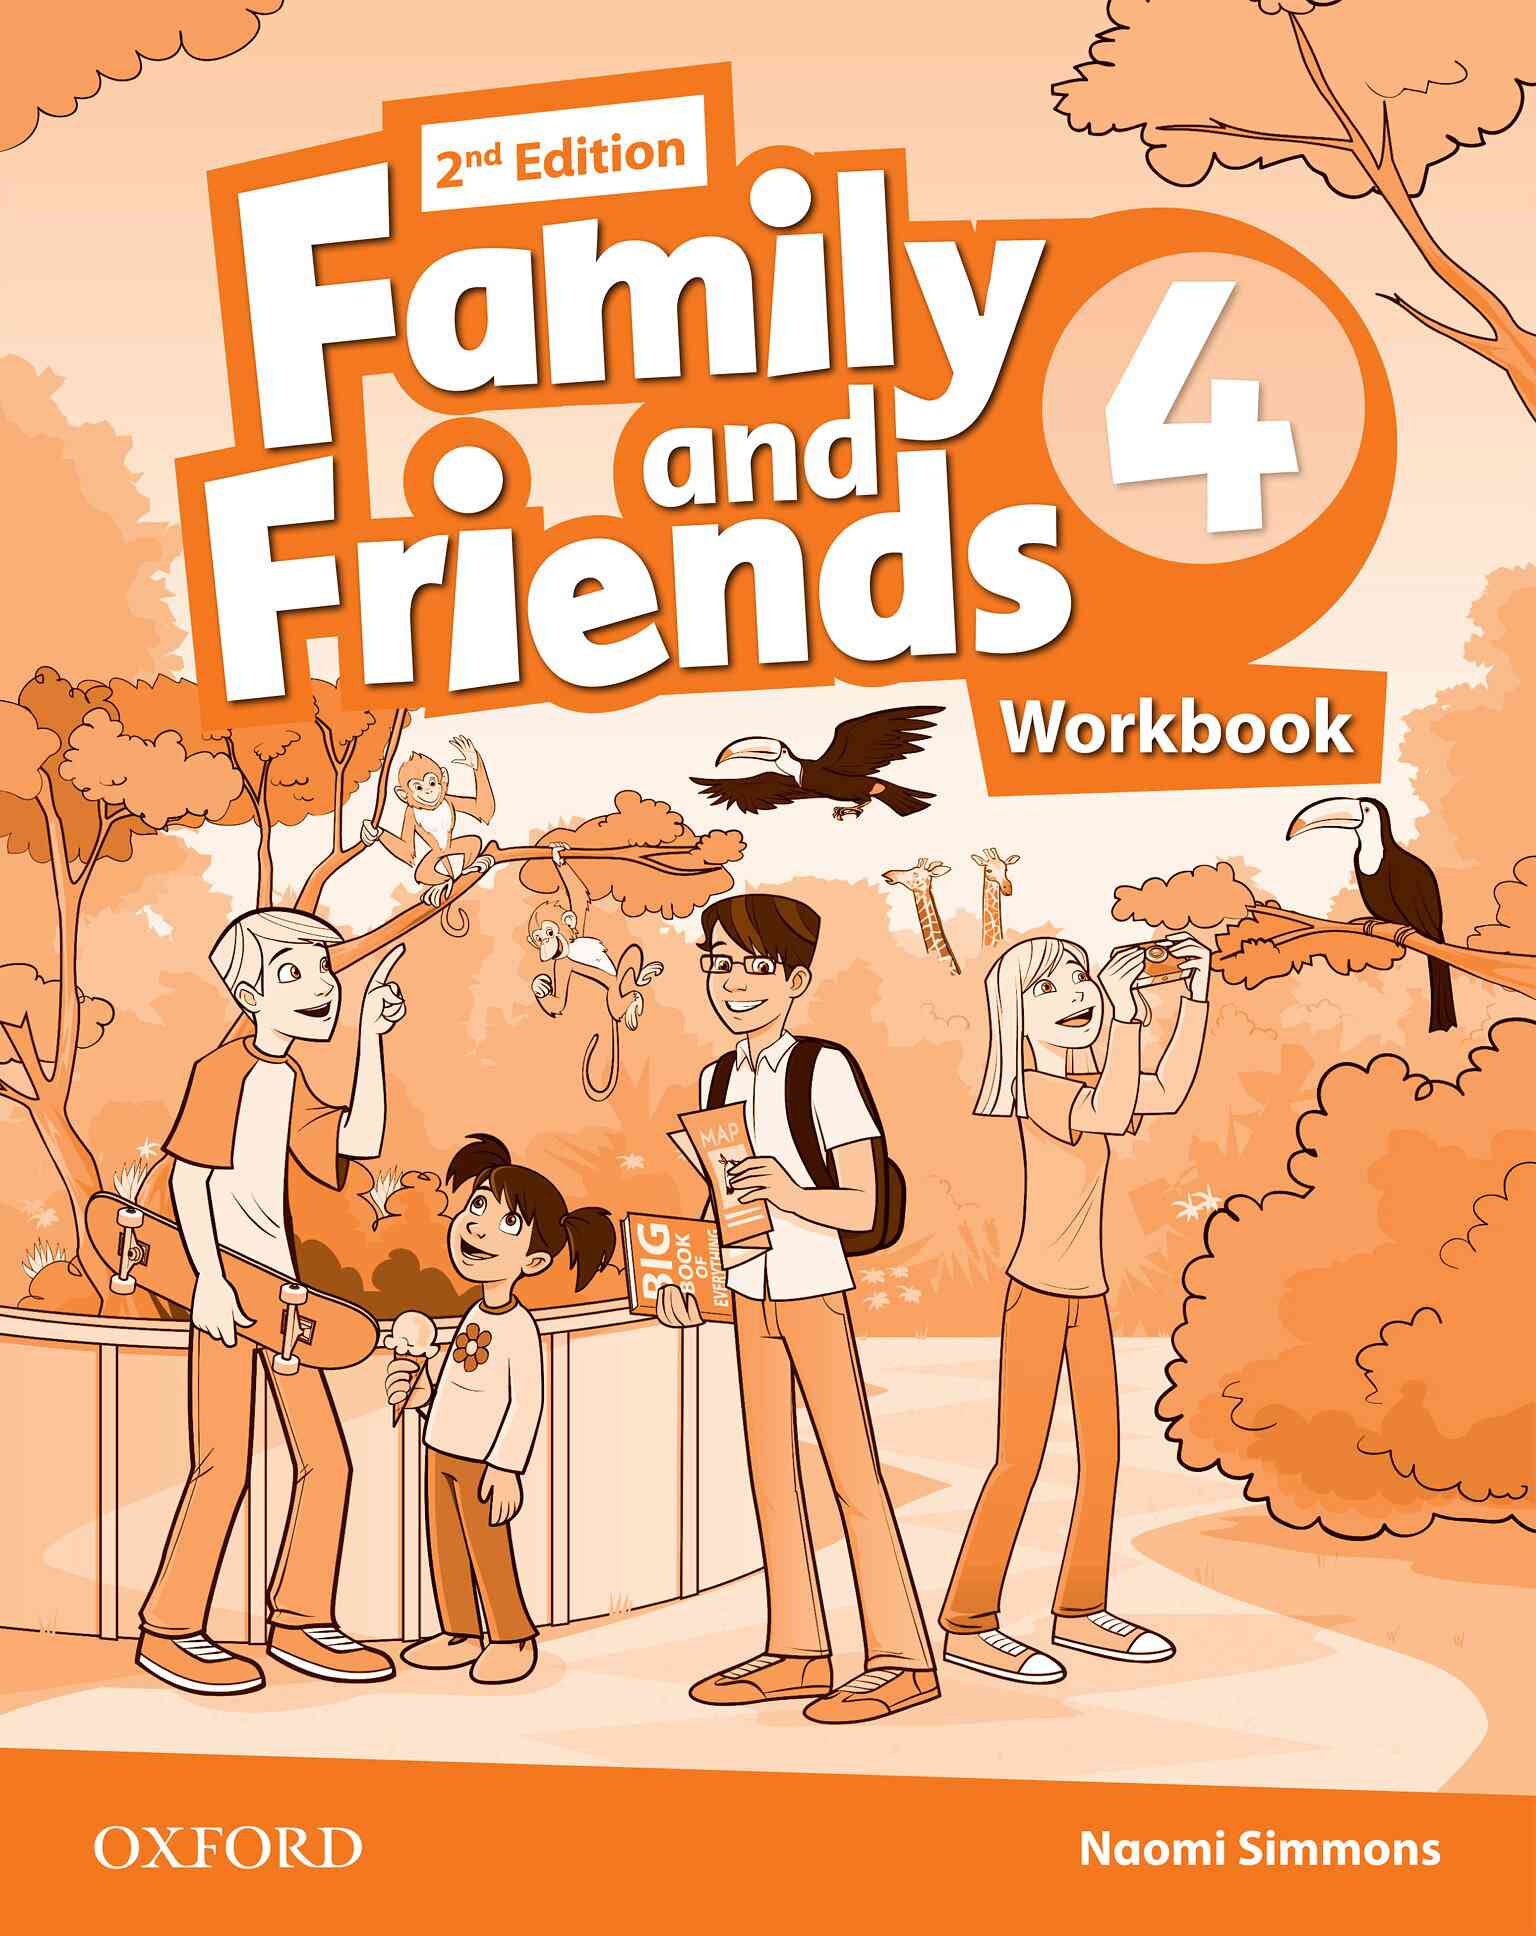 Английский язык friends 3 workbook. Family and friends4 Workbook 2nd Edition ответы Naomi Simmons. Family and friends 3 Workbook. Оксфорд Family and friends 4. Книга Family and friends 2.